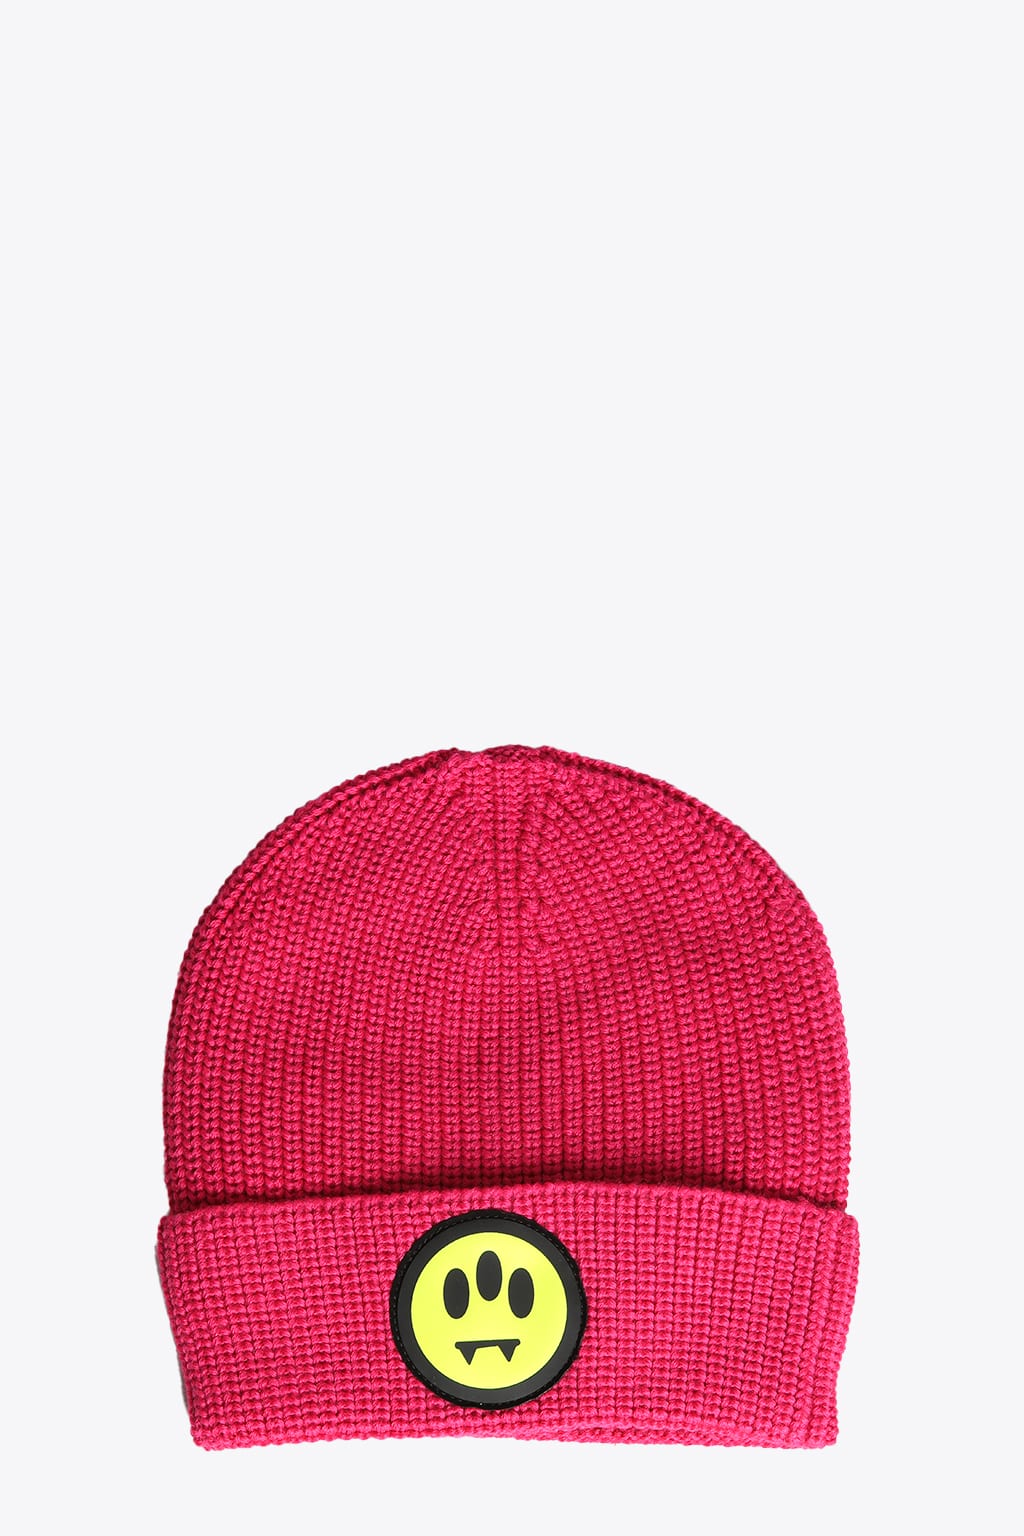 Barrow Wool Hat Unisex Bright pink rib-knit beanie with smile patch